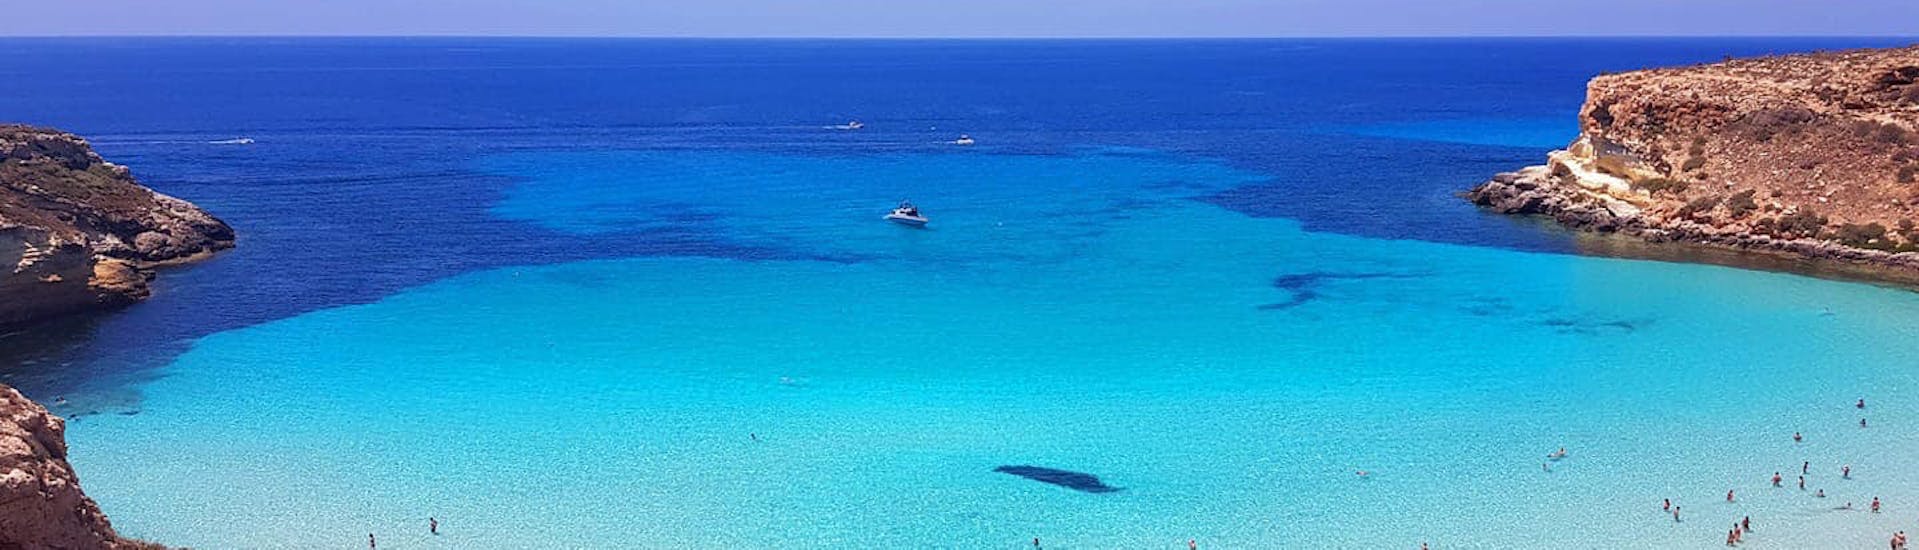 One of the breathtaking beaches that we will visit during our private boat trip around Lampedusa with lunch with Gita in Barca Liliana Lampedusa.